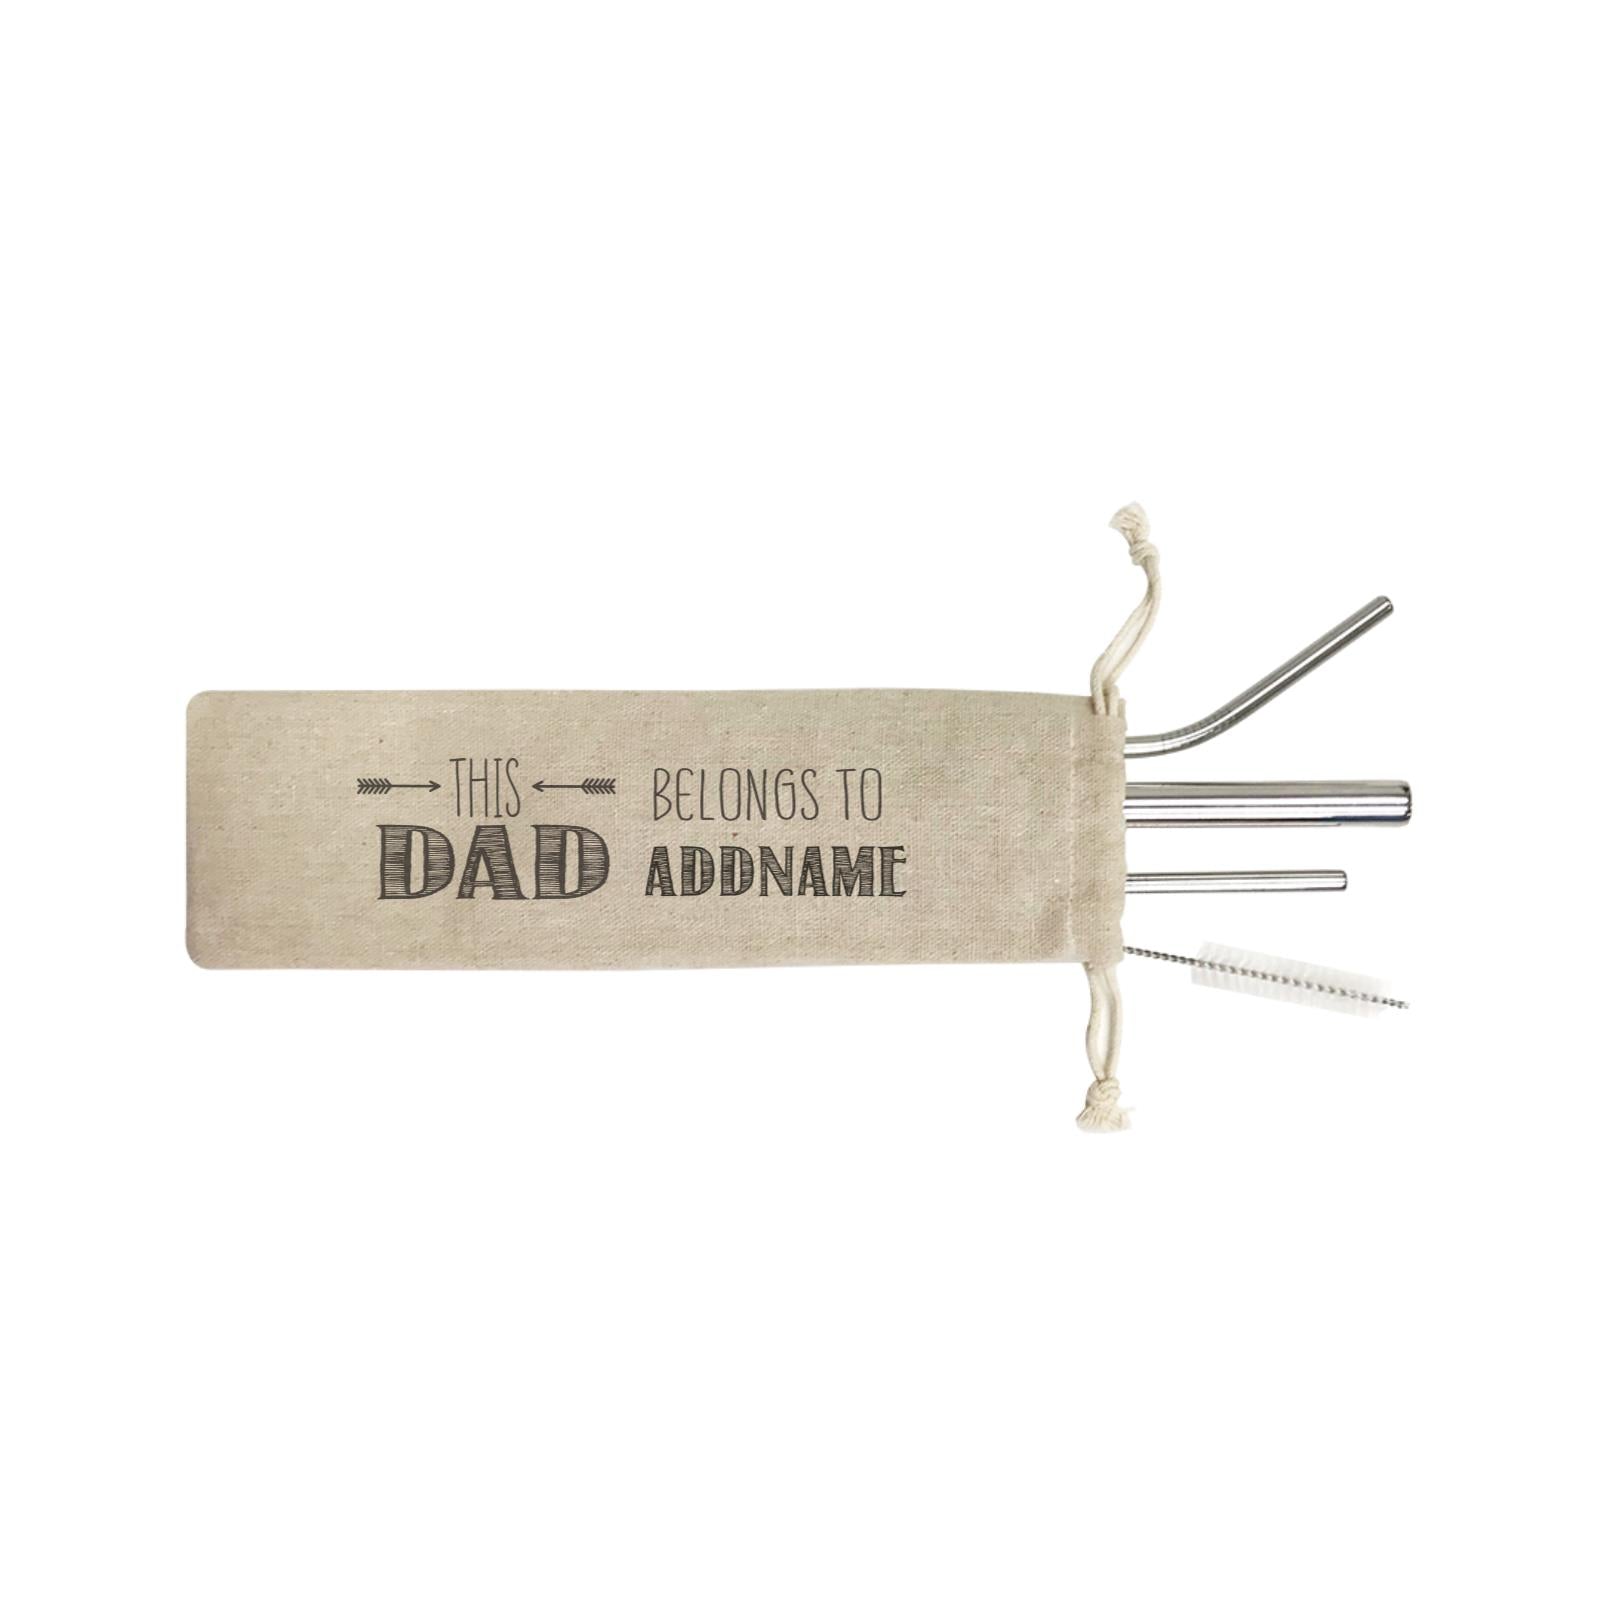 This Dad Belongs to Addname SB 4-In-1 Stainless Steel Straw Set in Satchel